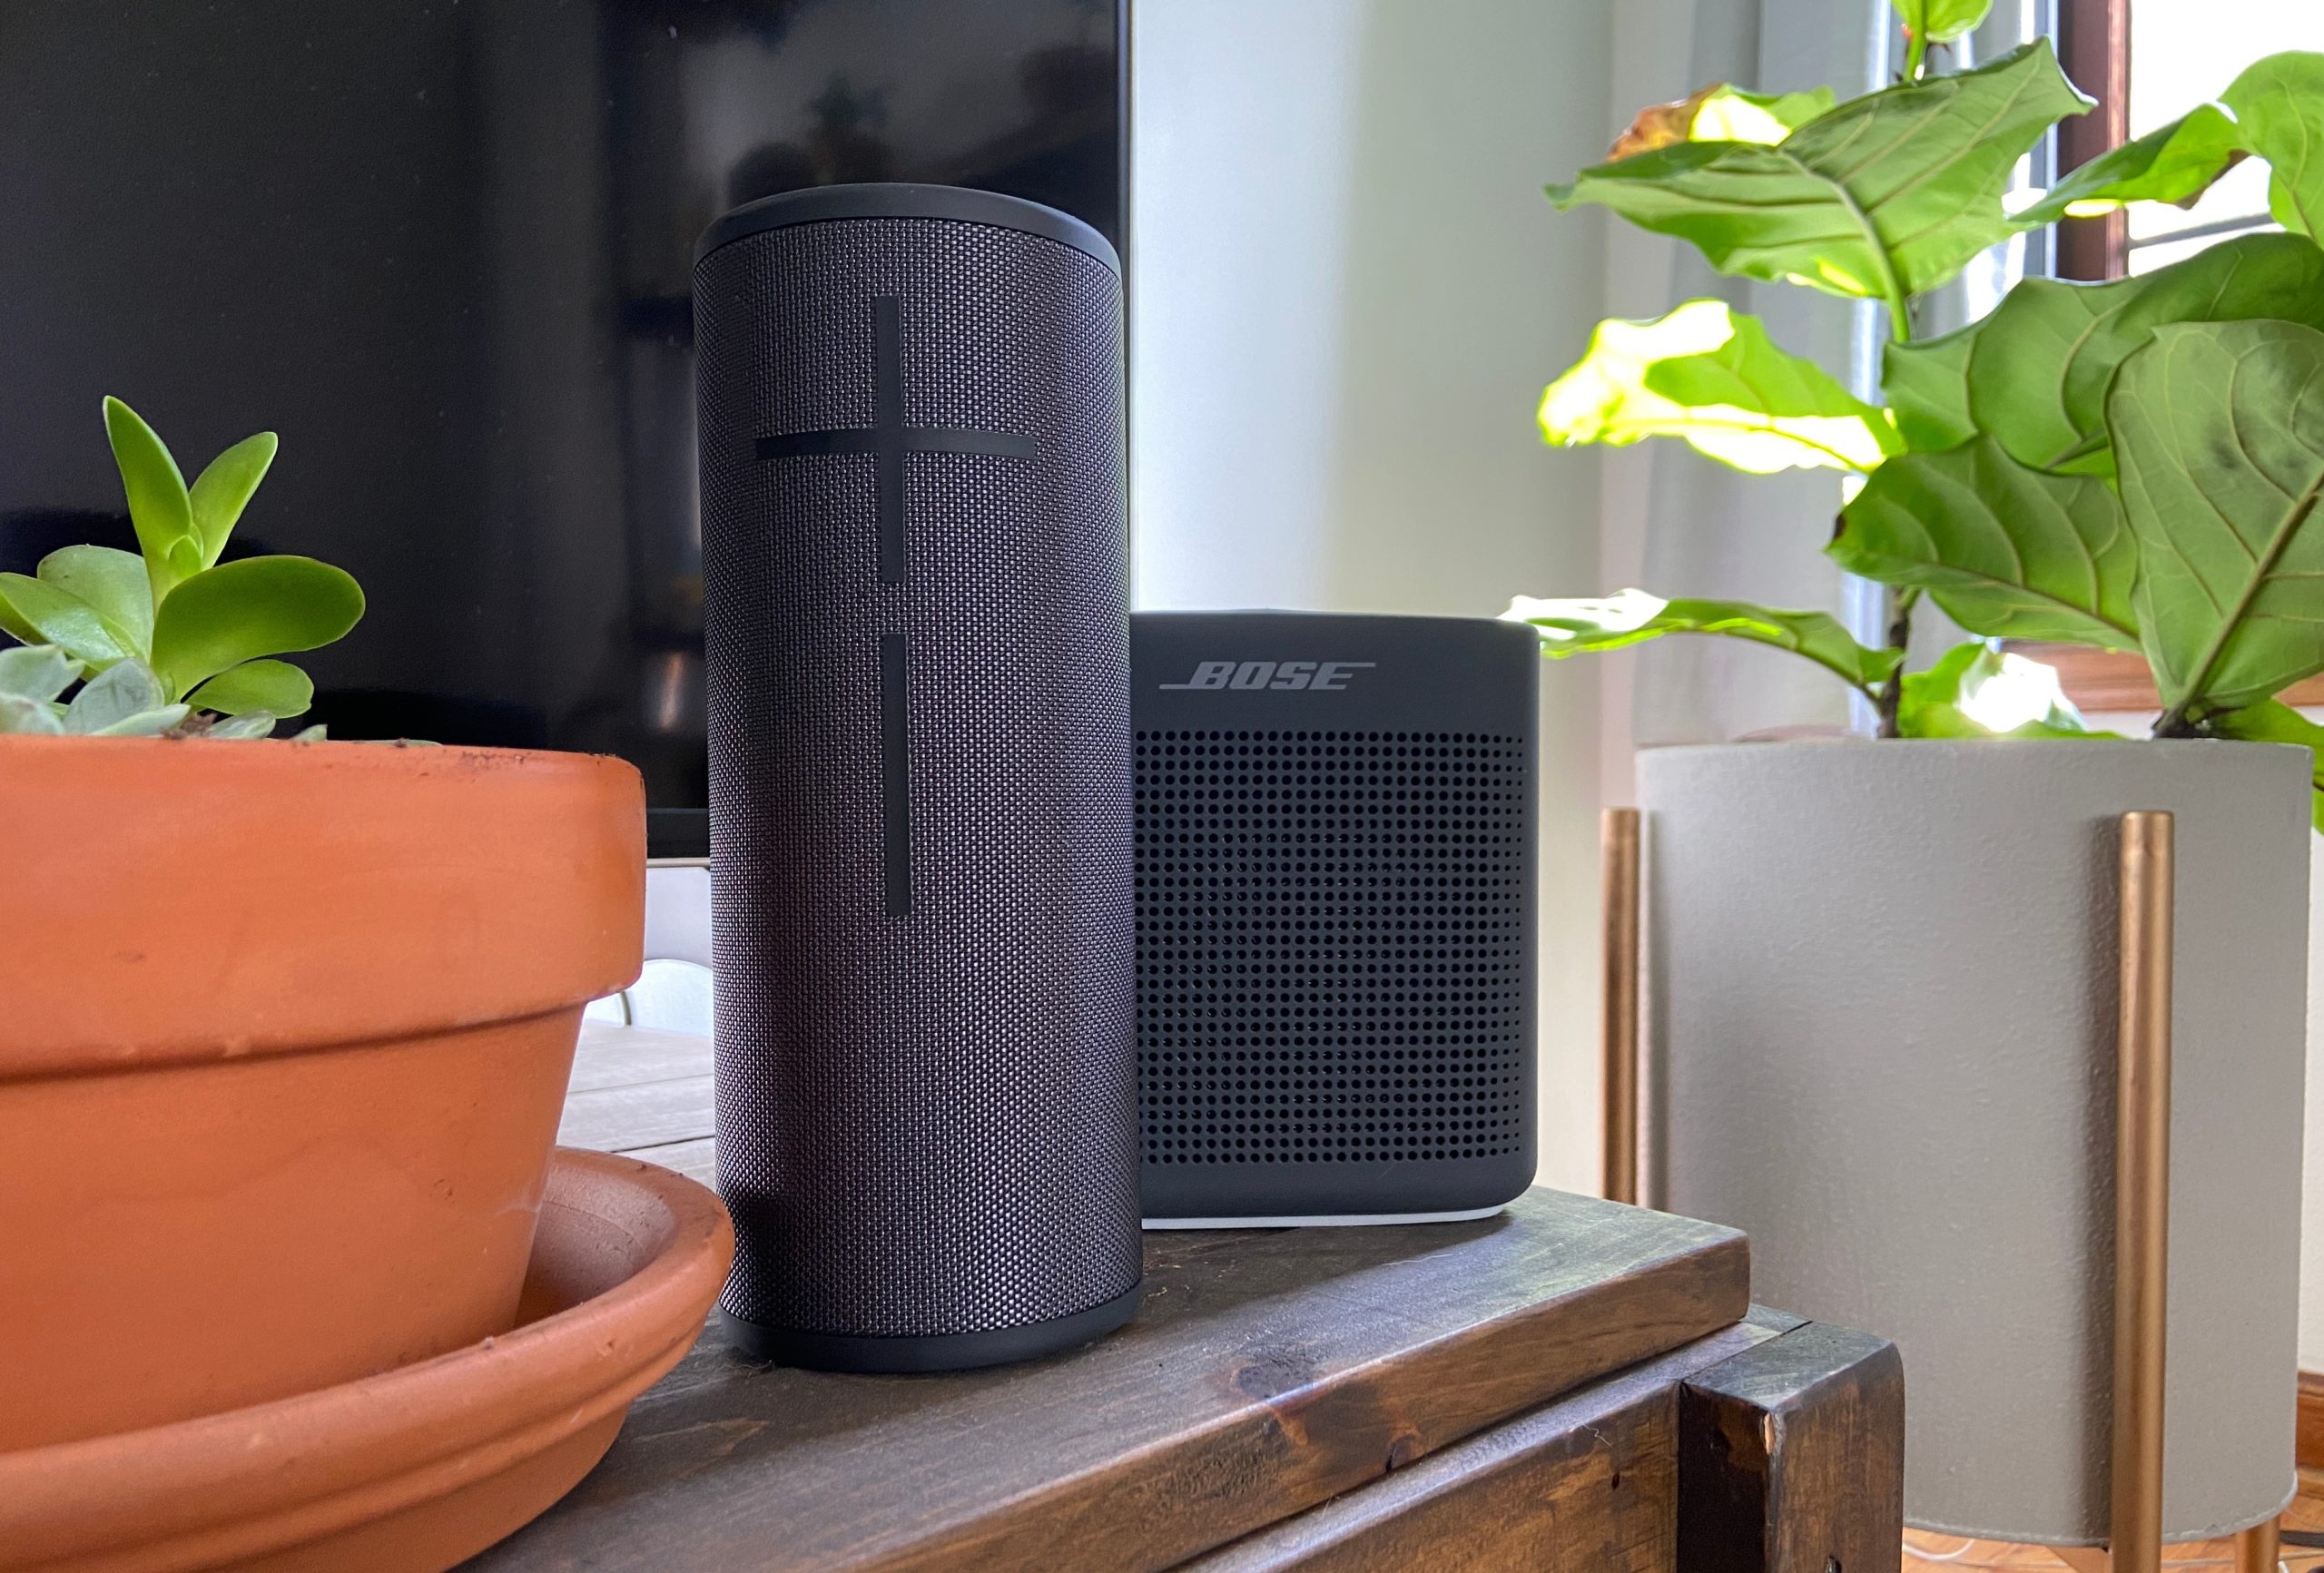 Ultimately, the Soundlink Colour 2 proves a trusty go-to on a budget. The Boom 3 wins out overall for ruggedness and true portability. (Photo: Catie Keck/Gizmodo)